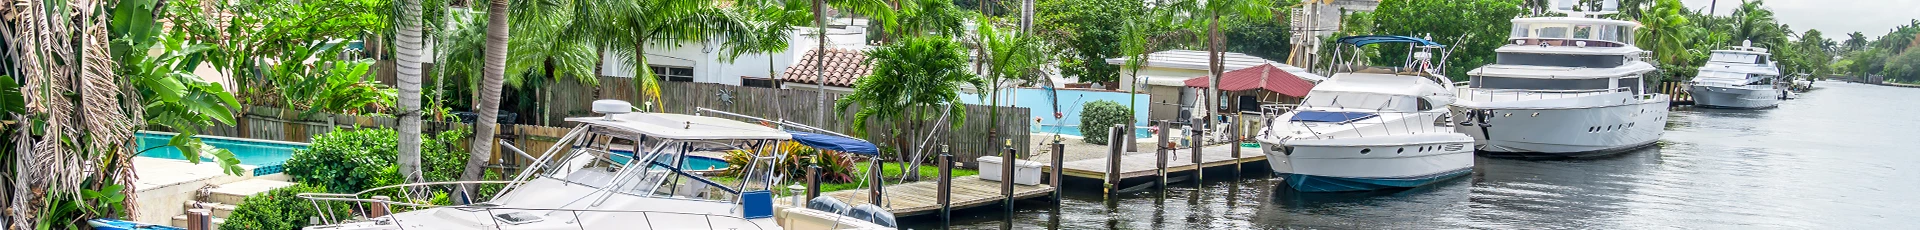 Boat Removal, Dismantle and Disposal in Sunrise Florida